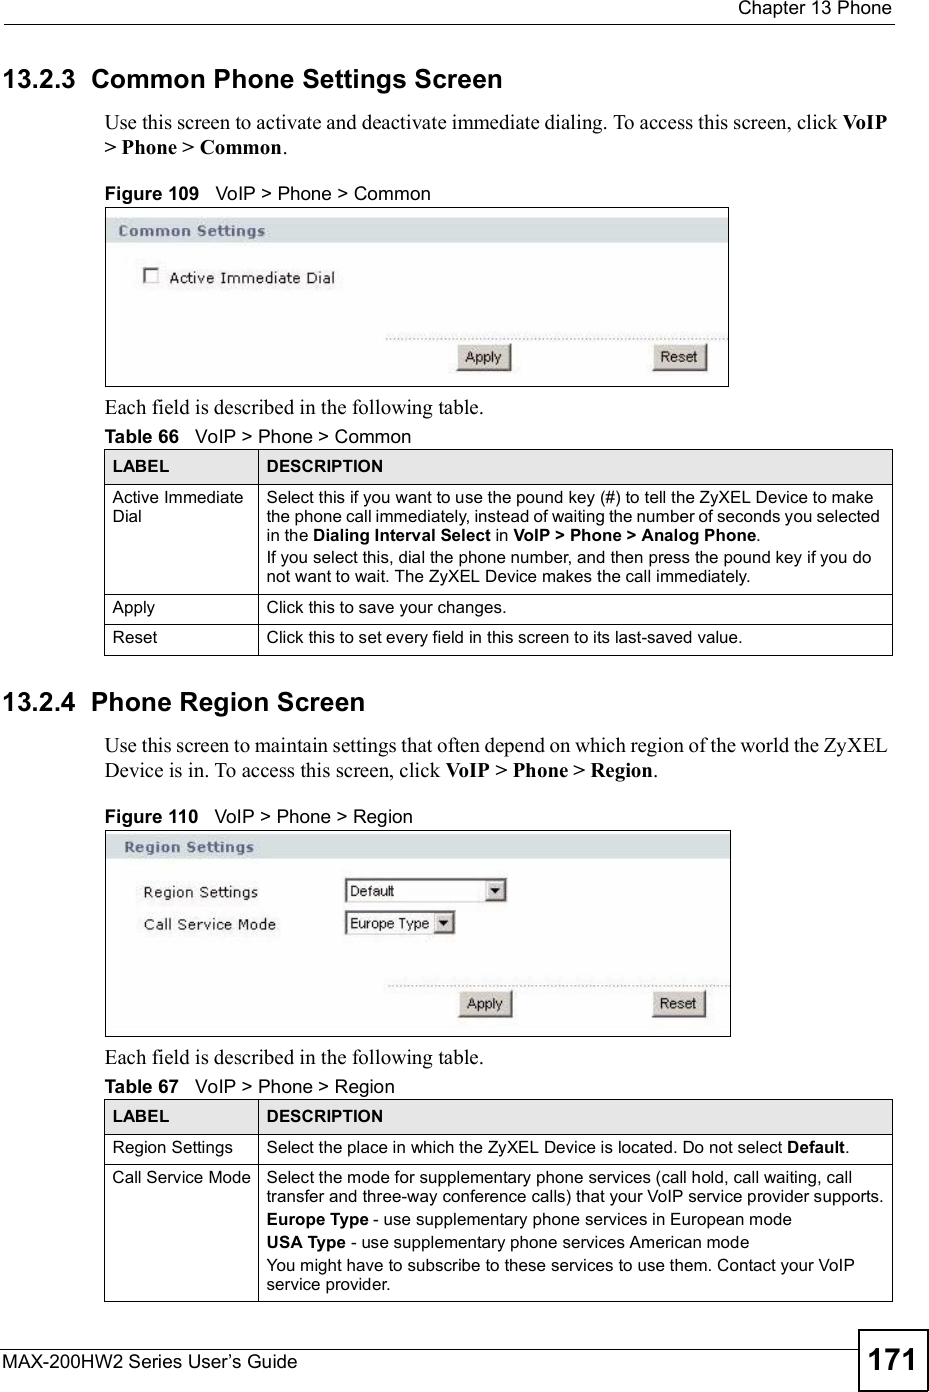  Chapter 13PhoneMAX-200HW2 Series User s Guide 17113.2.3  Common Phone Settings ScreenUse this screen to activate and deactivate immediate dialing. To access this screen, click VoIP &gt; Phone &gt; Common.Figure 109   VoIP &gt; Phone &gt; CommonEach field is described in the following table.13.2.4  Phone Region ScreenUse this screen to maintain settings that often depend on which region of the world the ZyXEL Device is in. To access this screen, click VoIP &gt; Phone &gt; Region.Figure 110   VoIP &gt; Phone &gt; RegionEach field is described in the following table.Table 66   VoIP &gt; Phone &gt; CommonLABEL DESCRIPTIONActive Immediate DialSelect this if you want to use the pound key (#) to tell the ZyXEL Device to make the phone call immediately, instead of waiting the number of seconds you selected in the Dialing Interval Select in VoIP &gt; Phone &gt; Analog Phone.If you select this, dial the phone number, and then press the pound key if you do not want to wait. The ZyXEL Device makes the call immediately. Apply Click this to save your changes.Reset Click this to set every field in this screen to its last-saved value.Table 67   VoIP &gt; Phone &gt; RegionLABEL DESCRIPTIONRegion Settings Select the place in which the ZyXEL Device is located. Do not select Default.Call Service Mode Select the mode for supplementary phone services (call hold, call waiting, call transfer and three-way conference calls) that your VoIP service provider supports.Europe Type - use supplementary phone services in European modeUSA Type - use supplementary phone services American modeYou might have to subscribe to these services to use them. Contact your VoIP service provider.